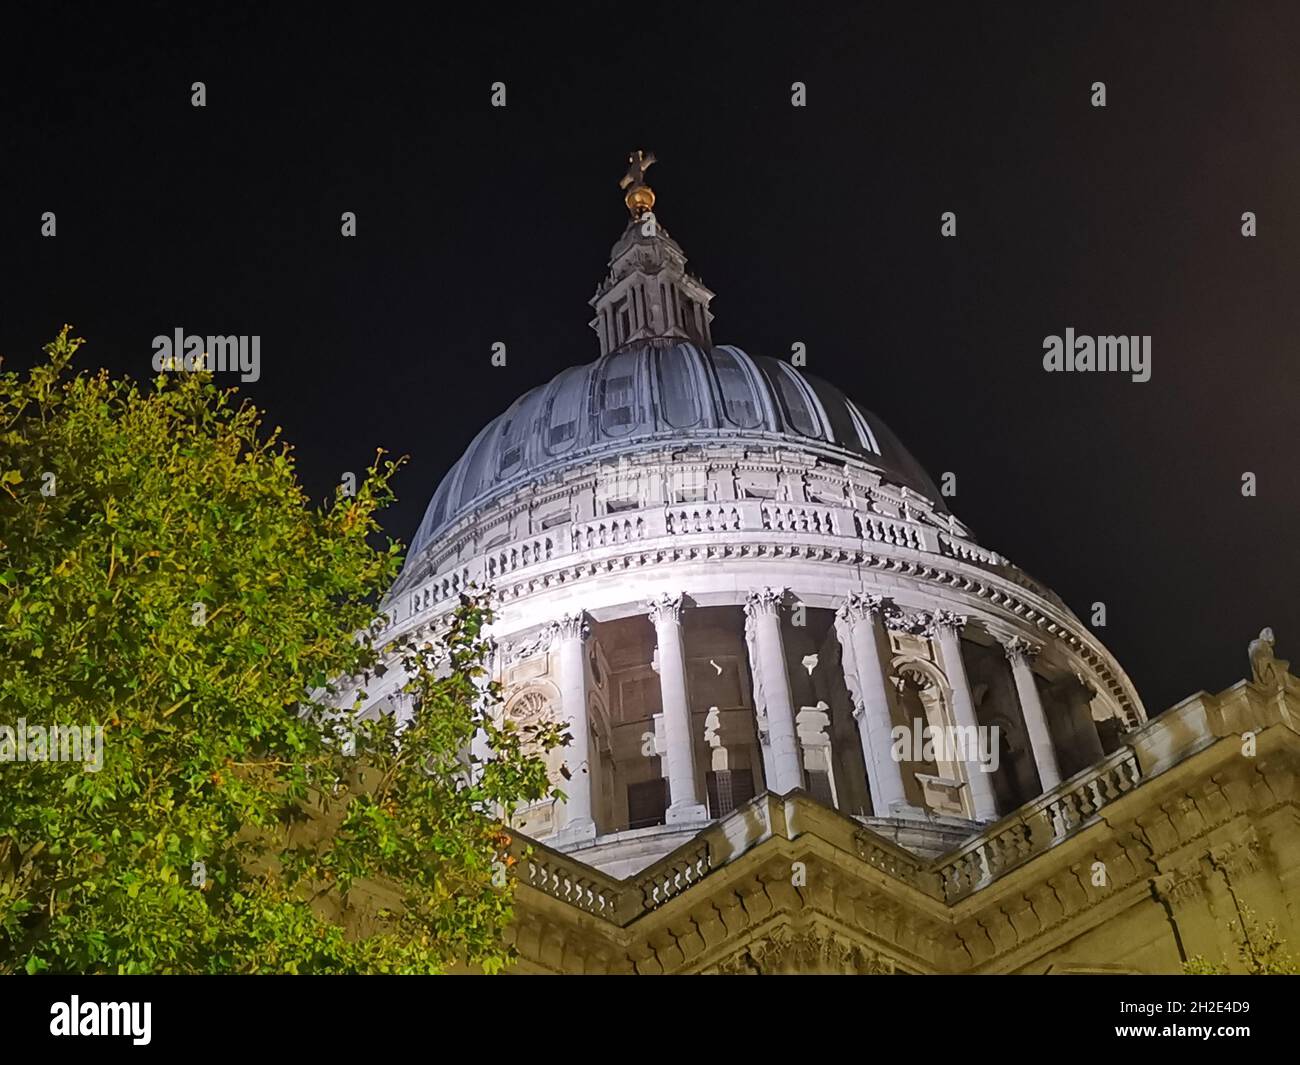 9 October 2021 - London, UK: View of St Paul's Cathedral from below Stock Photo